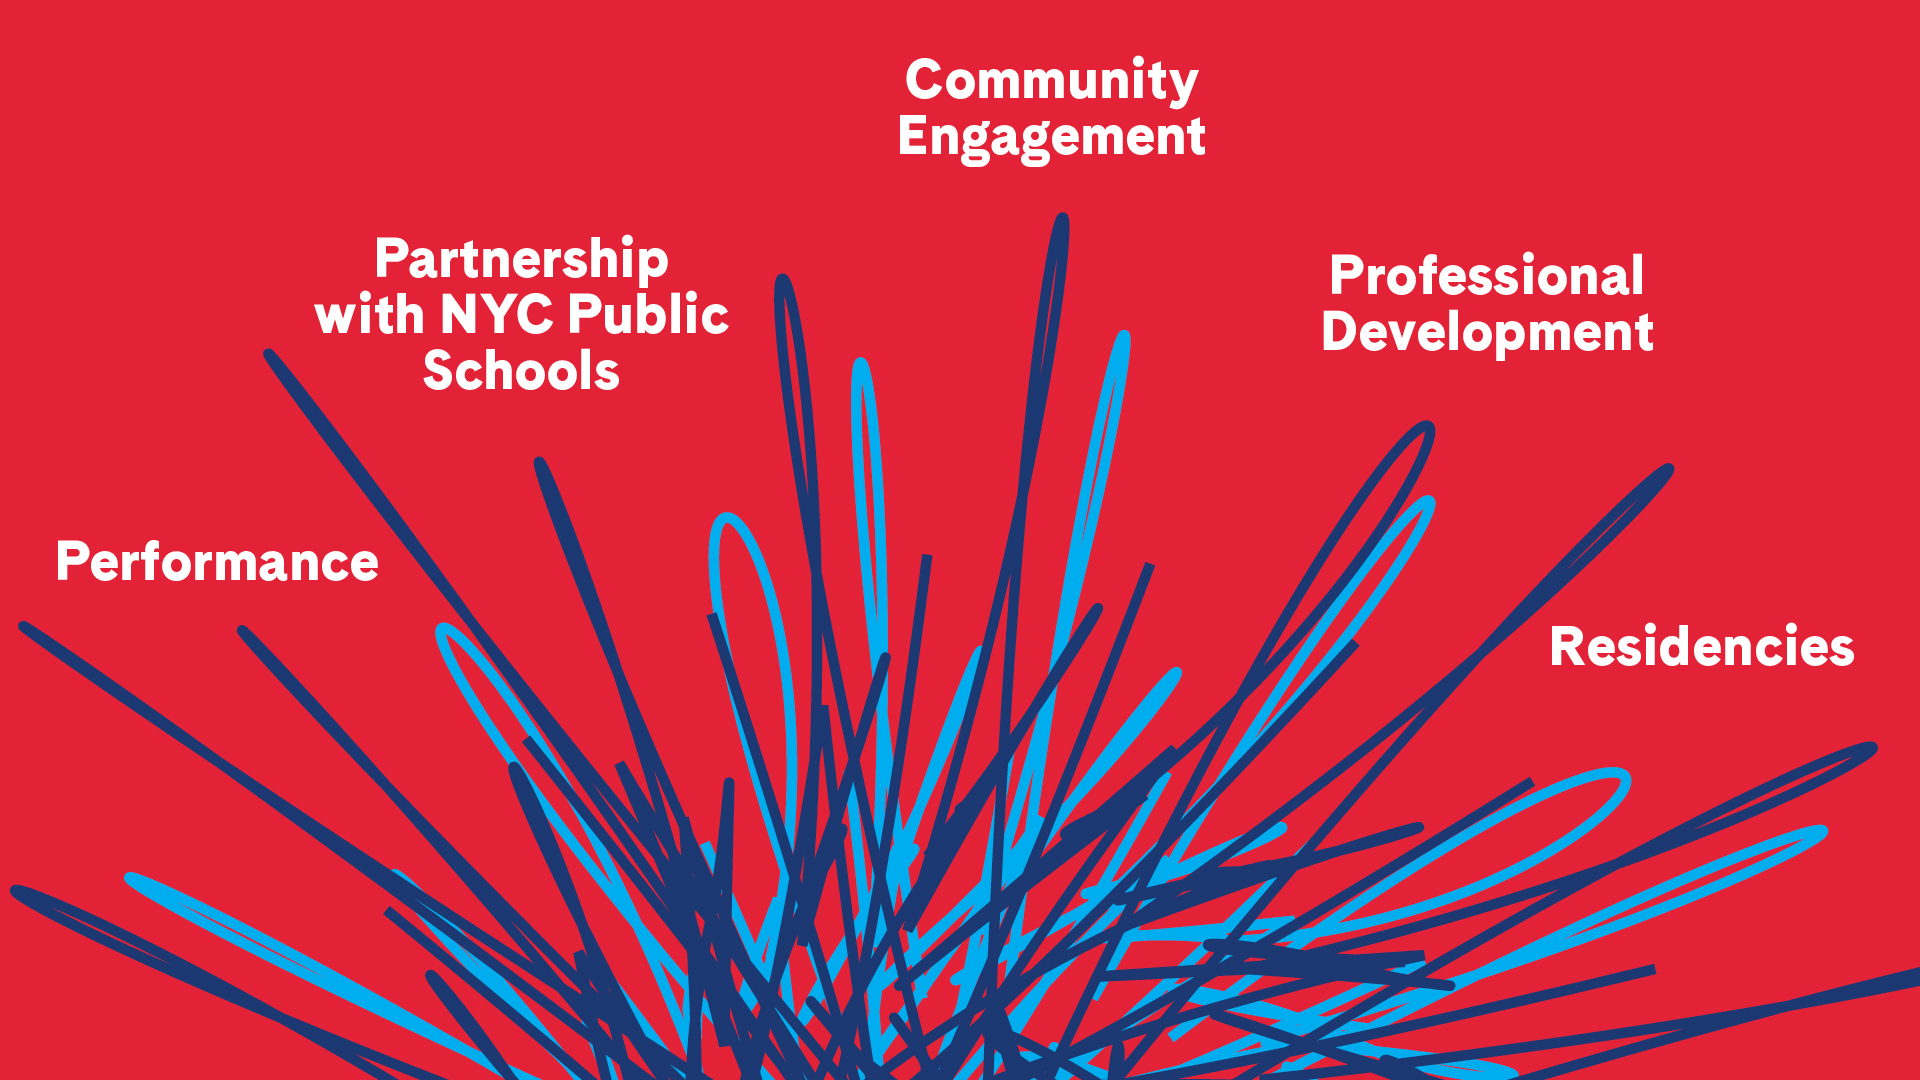 Blue and light blue ribbons of color extend toward the titles: Performance, Partnership with NYC Public Schools, Community Engagement, Professional Development, and Residencies